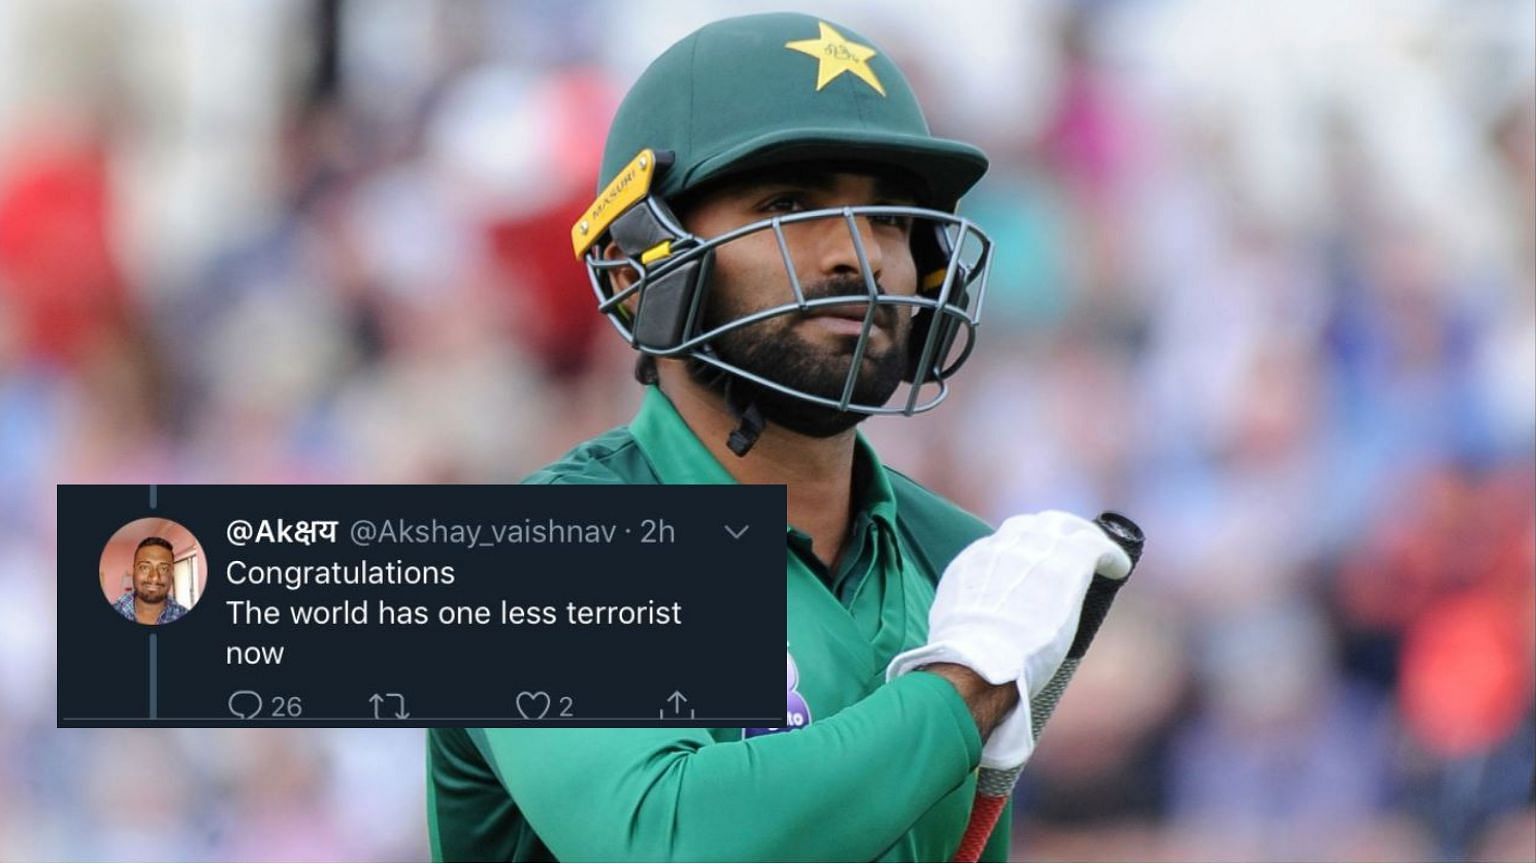 Asif Ali will return to Pakistan to attend his child’s funeral and will join the team ahead of the World Cup starting from May 30.